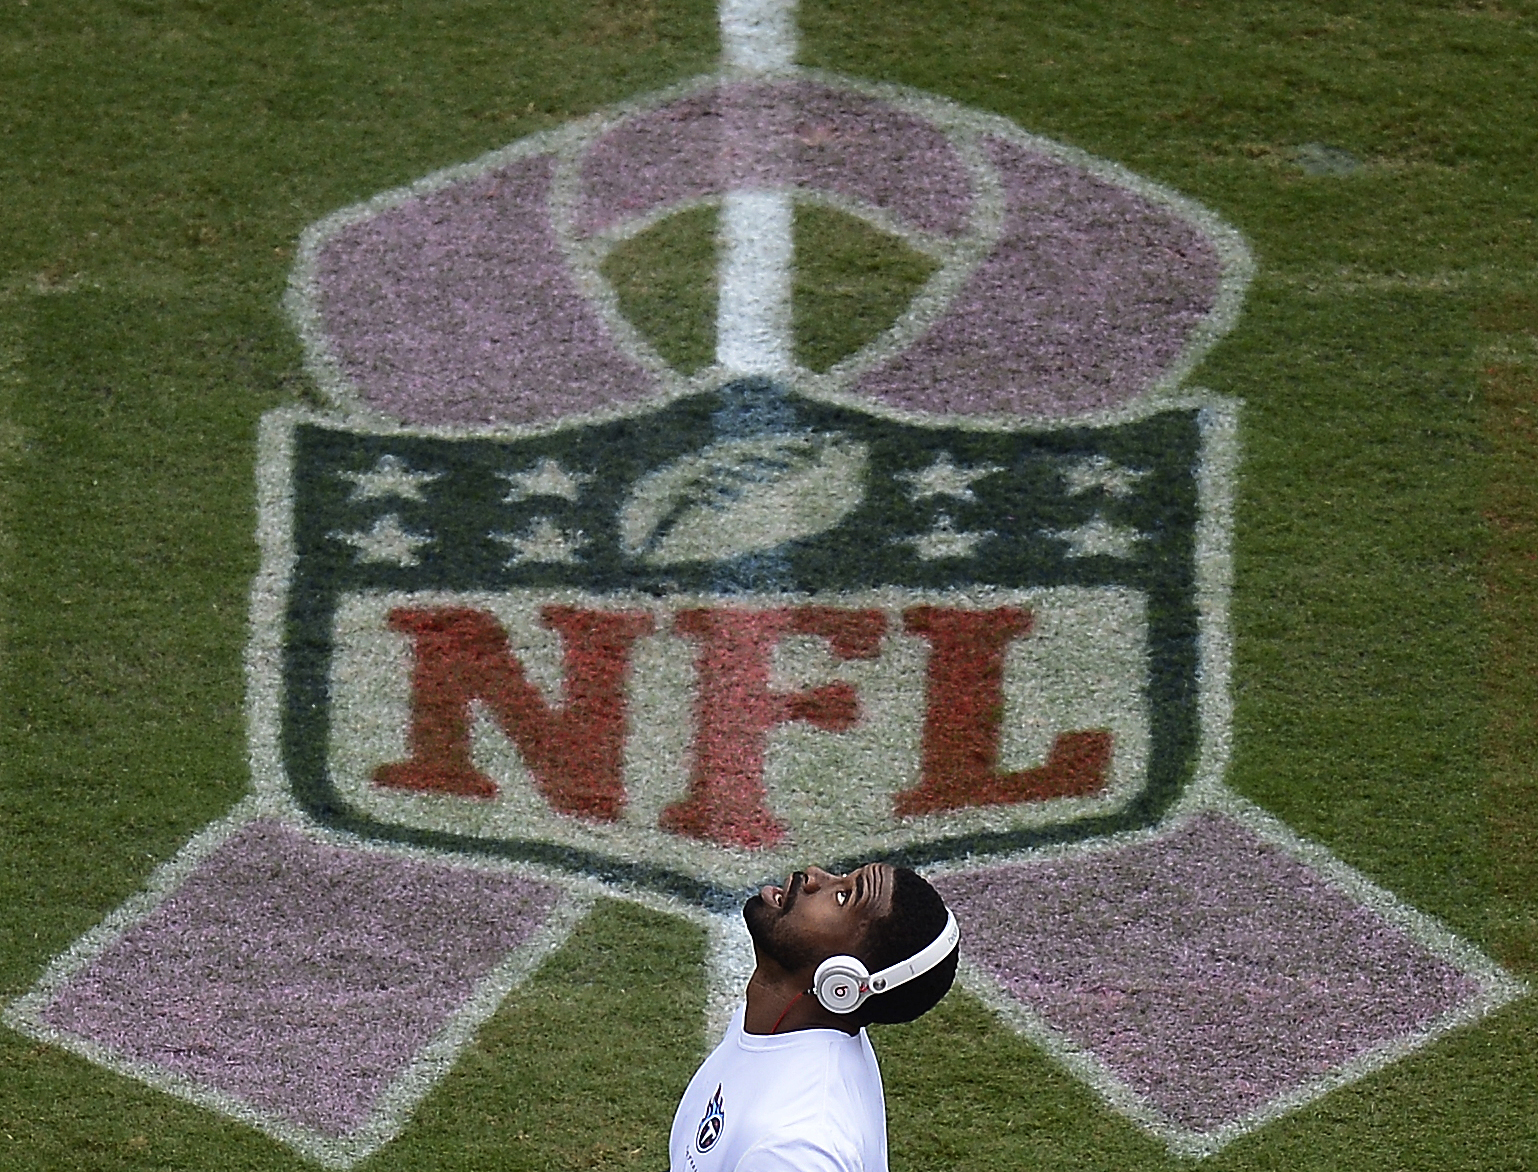 Tennessee Titans wide receiver Nate Washington warms up by a breast cancer awareness logo before an NFL football game between the Tennessee Titans and theKansas City Chiefs on Sunday, Oct. 6, 2013, in Nashville, Tenn. (AP Photo/ Mark Zaleski)